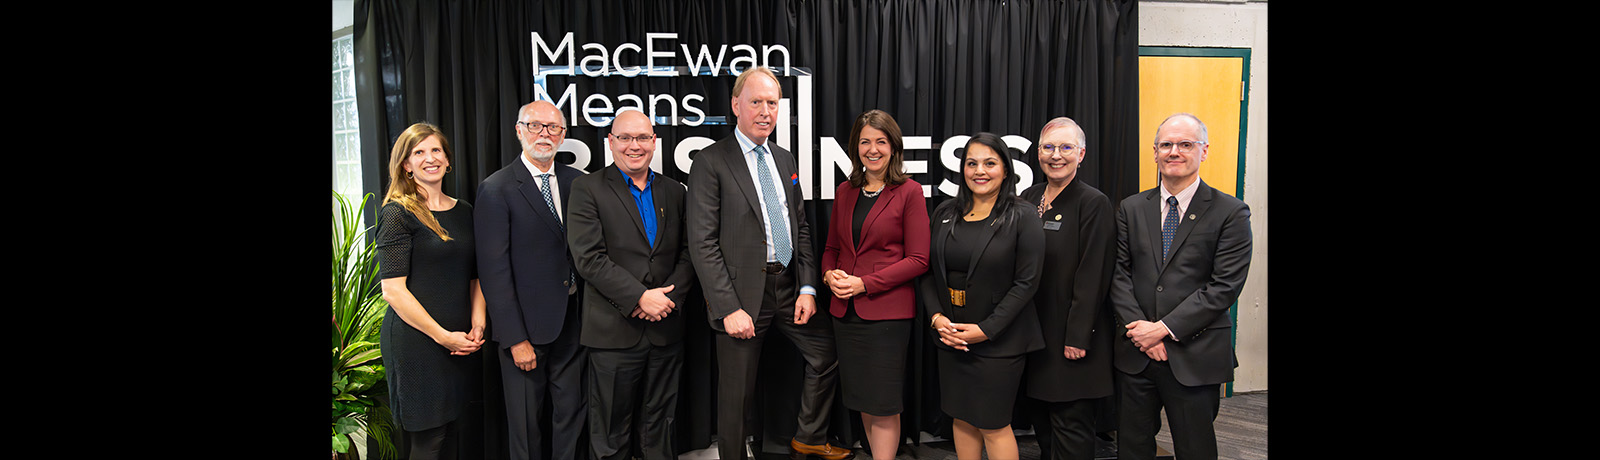 Dignitaries stand in front of a MacEwan Means Business banner at the event on November 20.